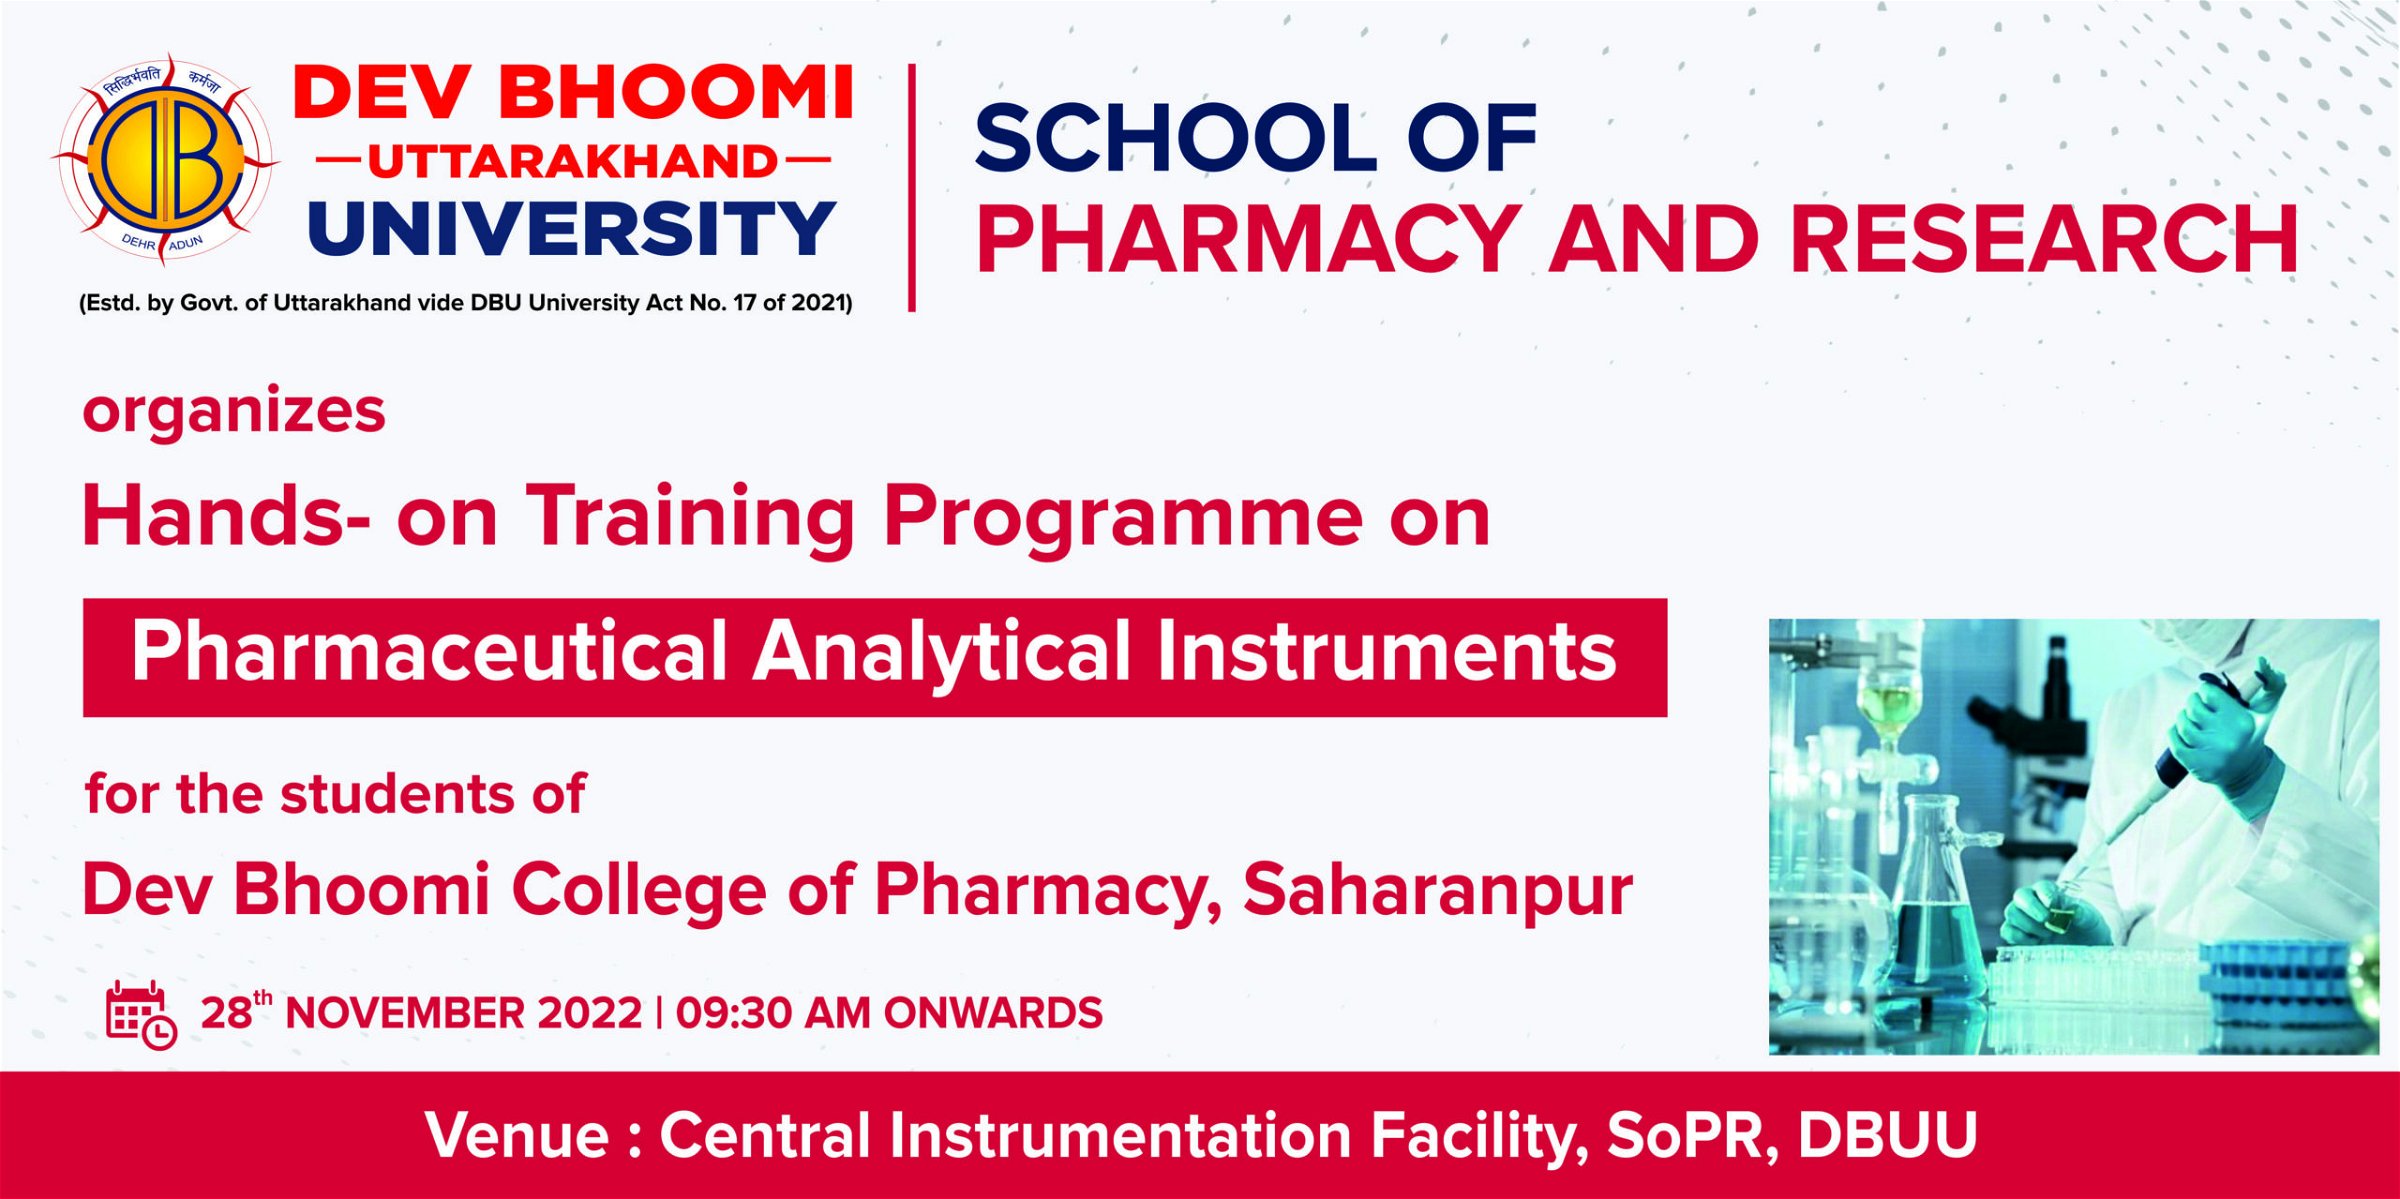 Hands- on Training Programme on Pharmaceutical Analytical Instruments